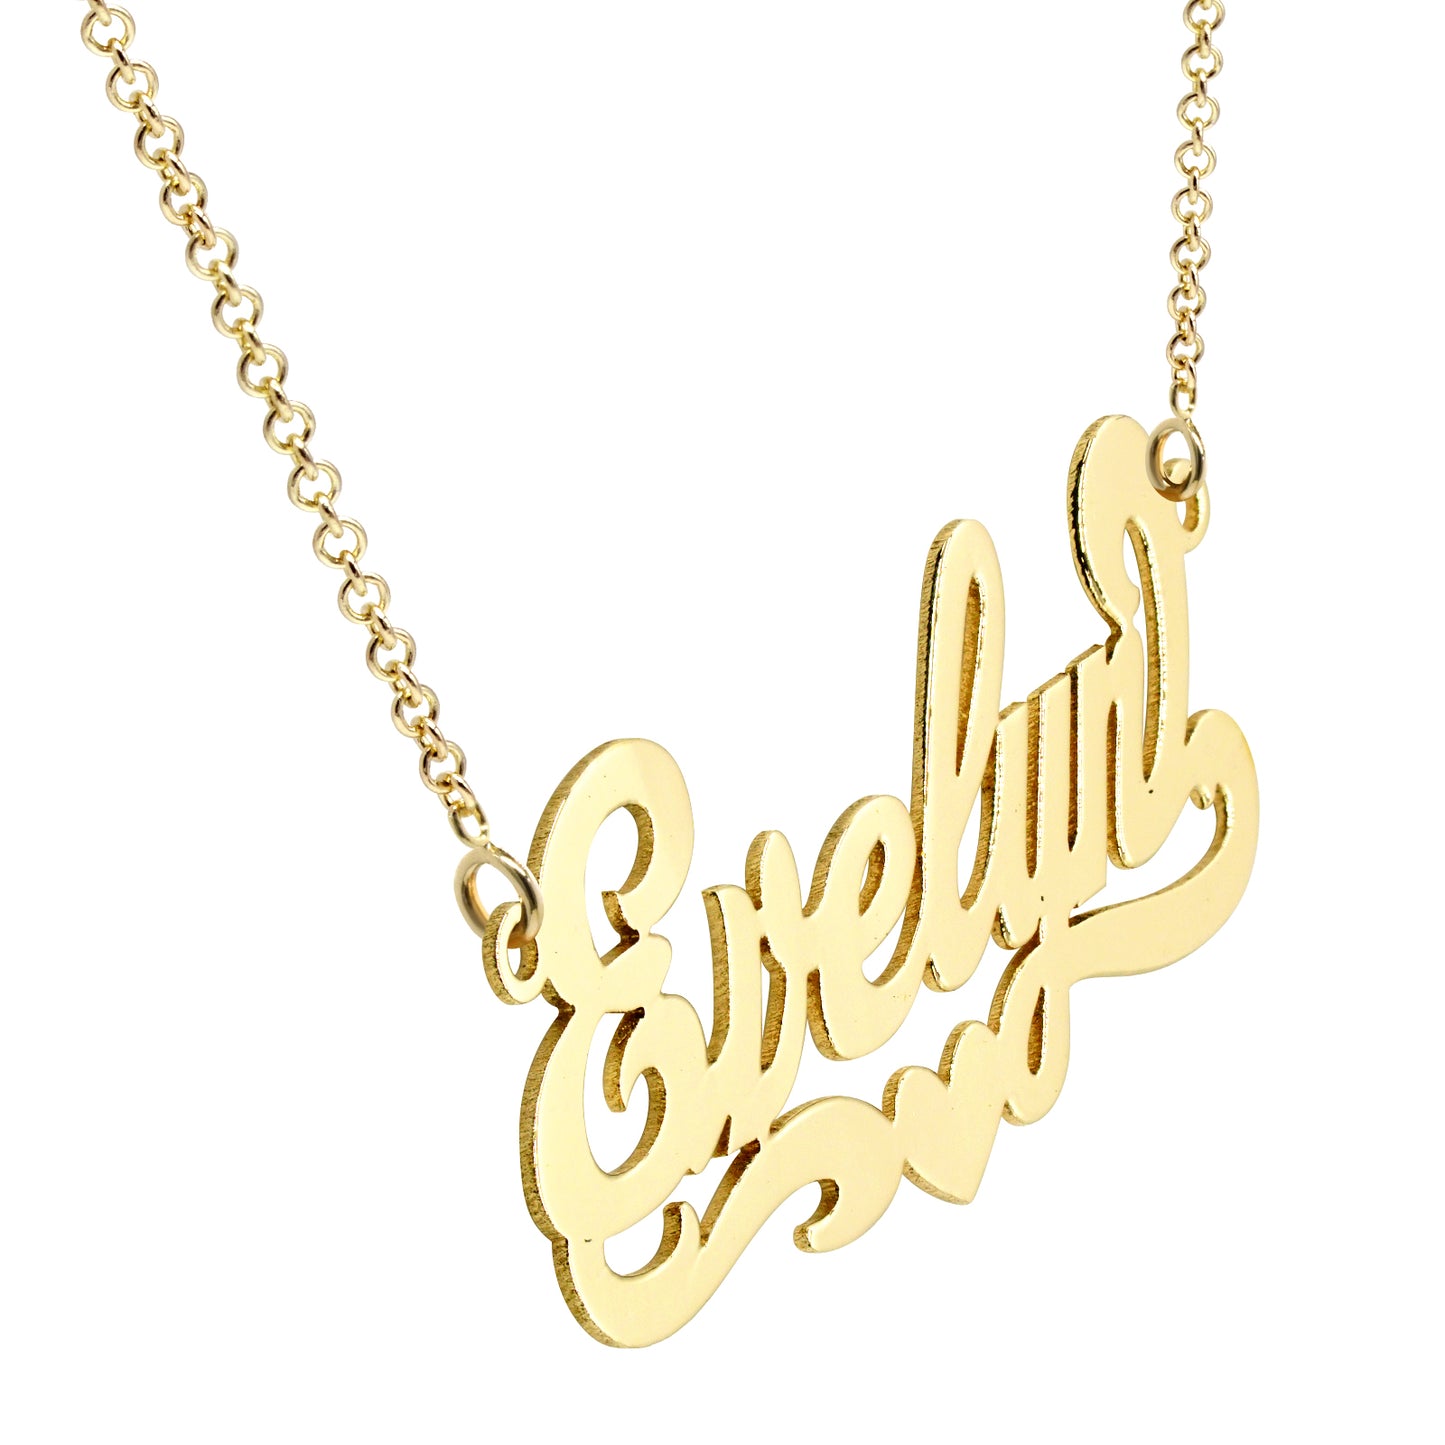 Custom Name Plate Necklace in 14K Gold | High Polish